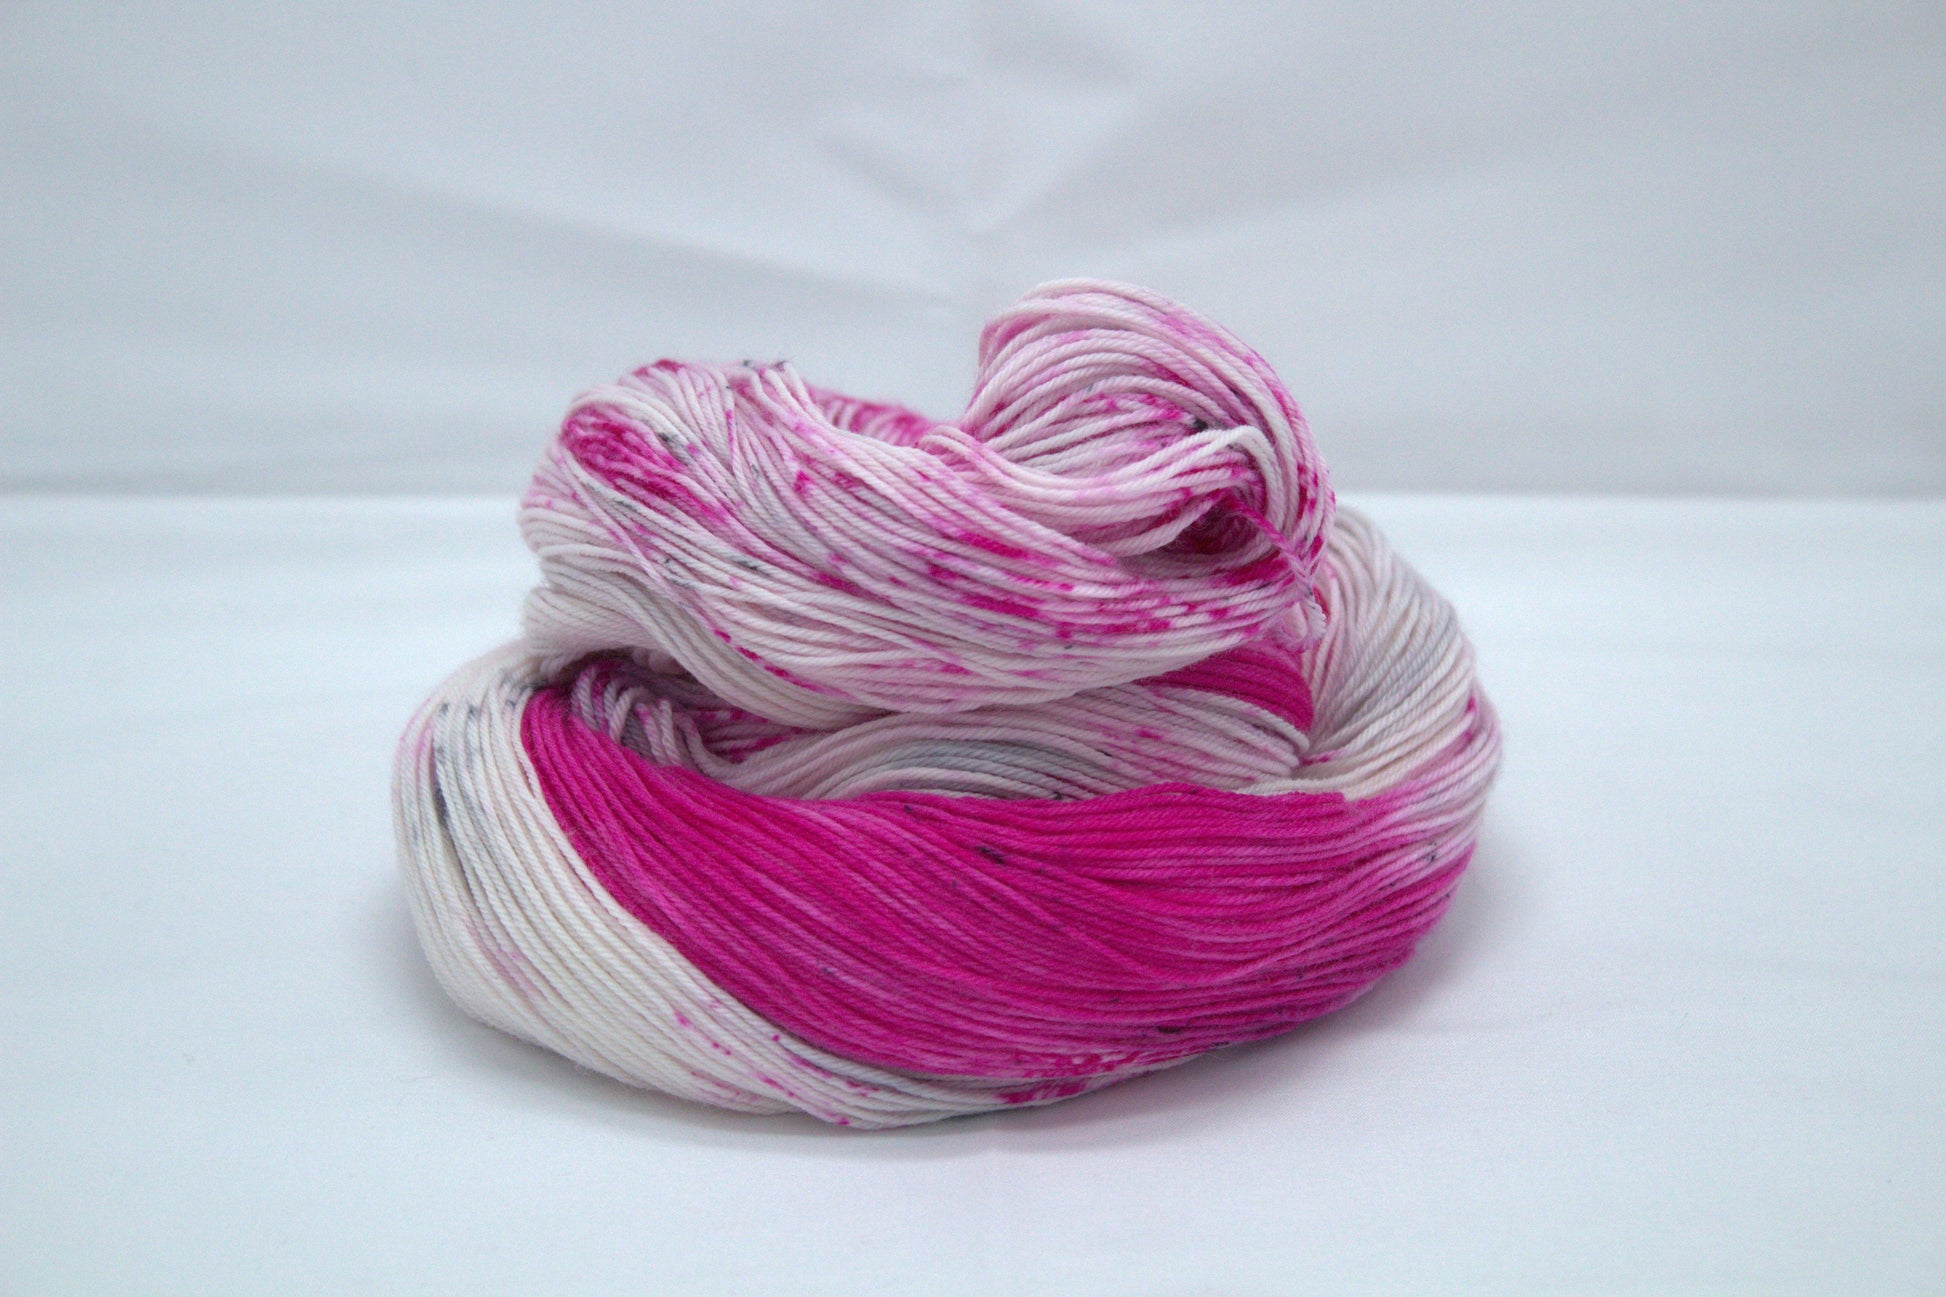 one curled up skein bright pink variegated yarn with pink and dark gray speckles on light background.